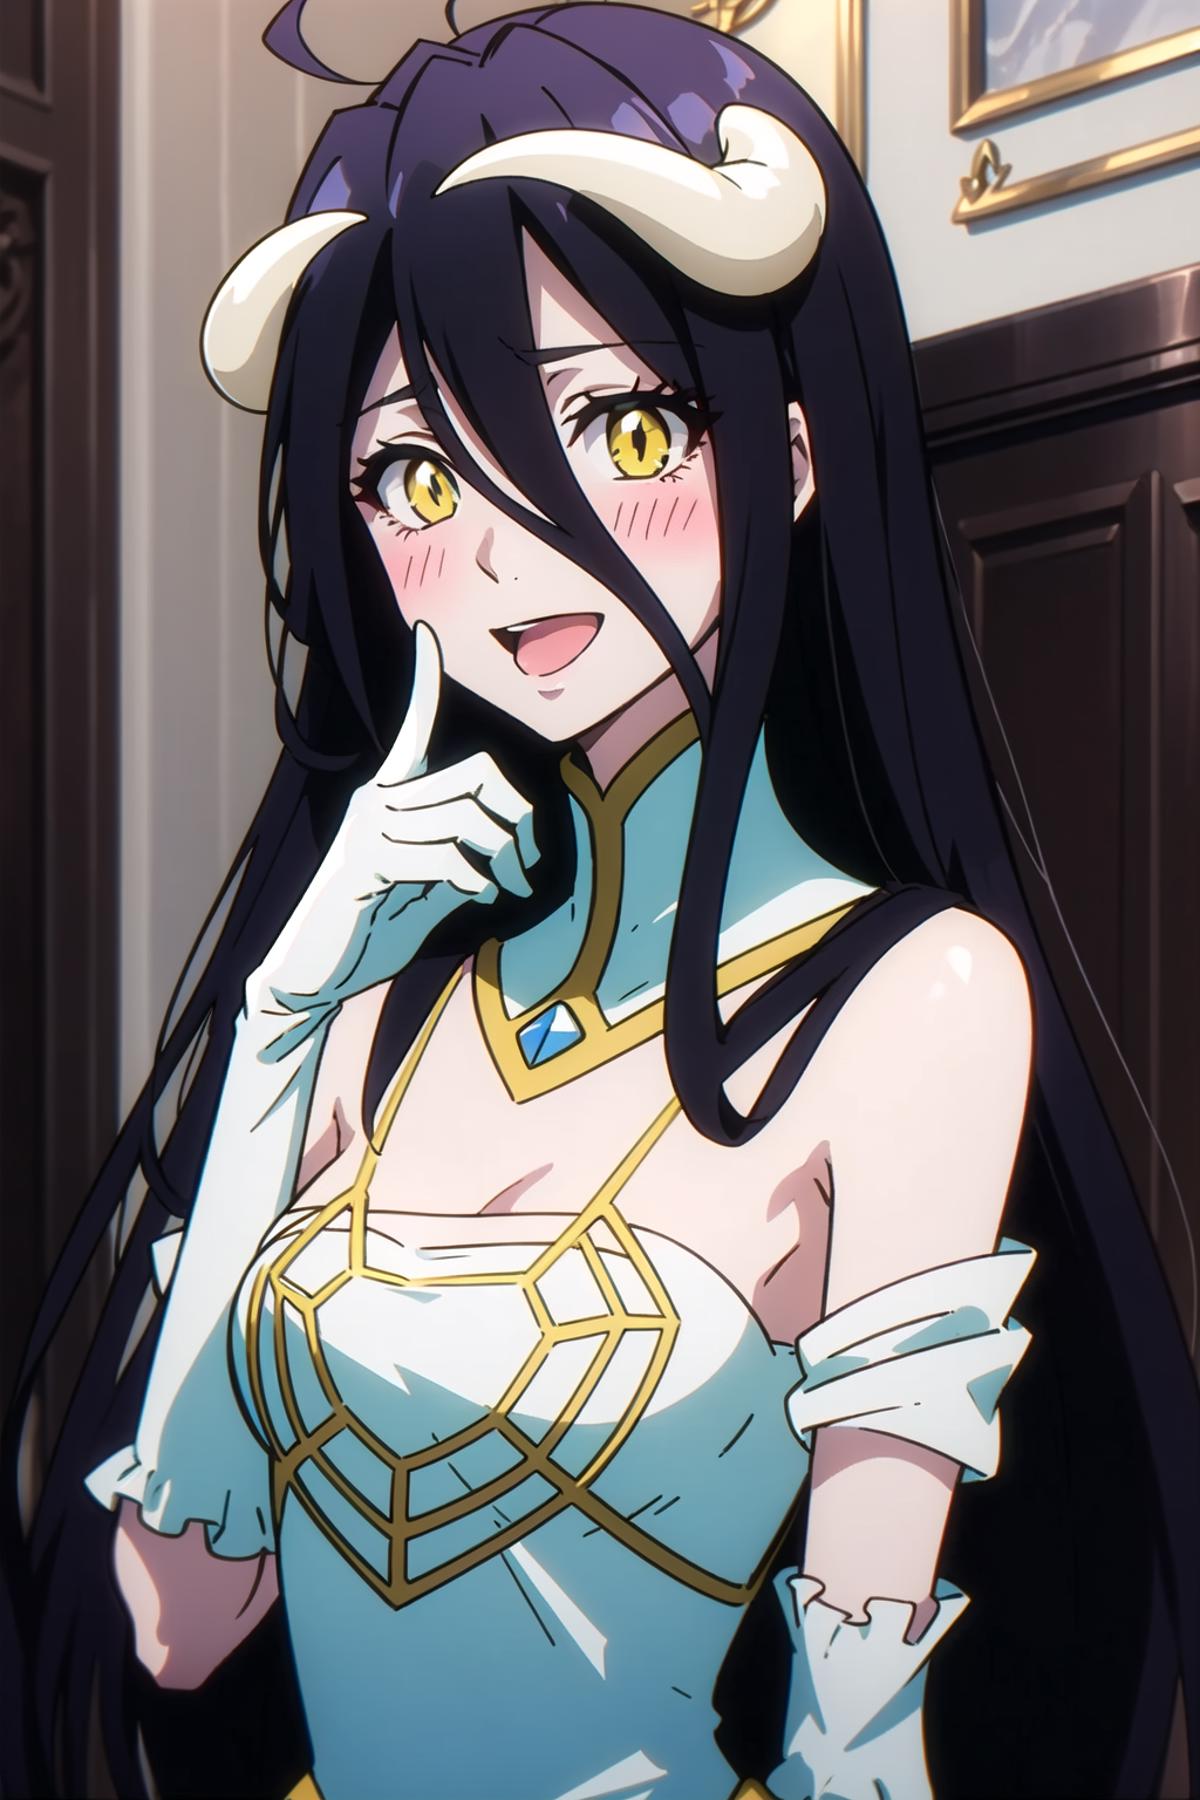 Albedo (overlord) image by Wolfdua